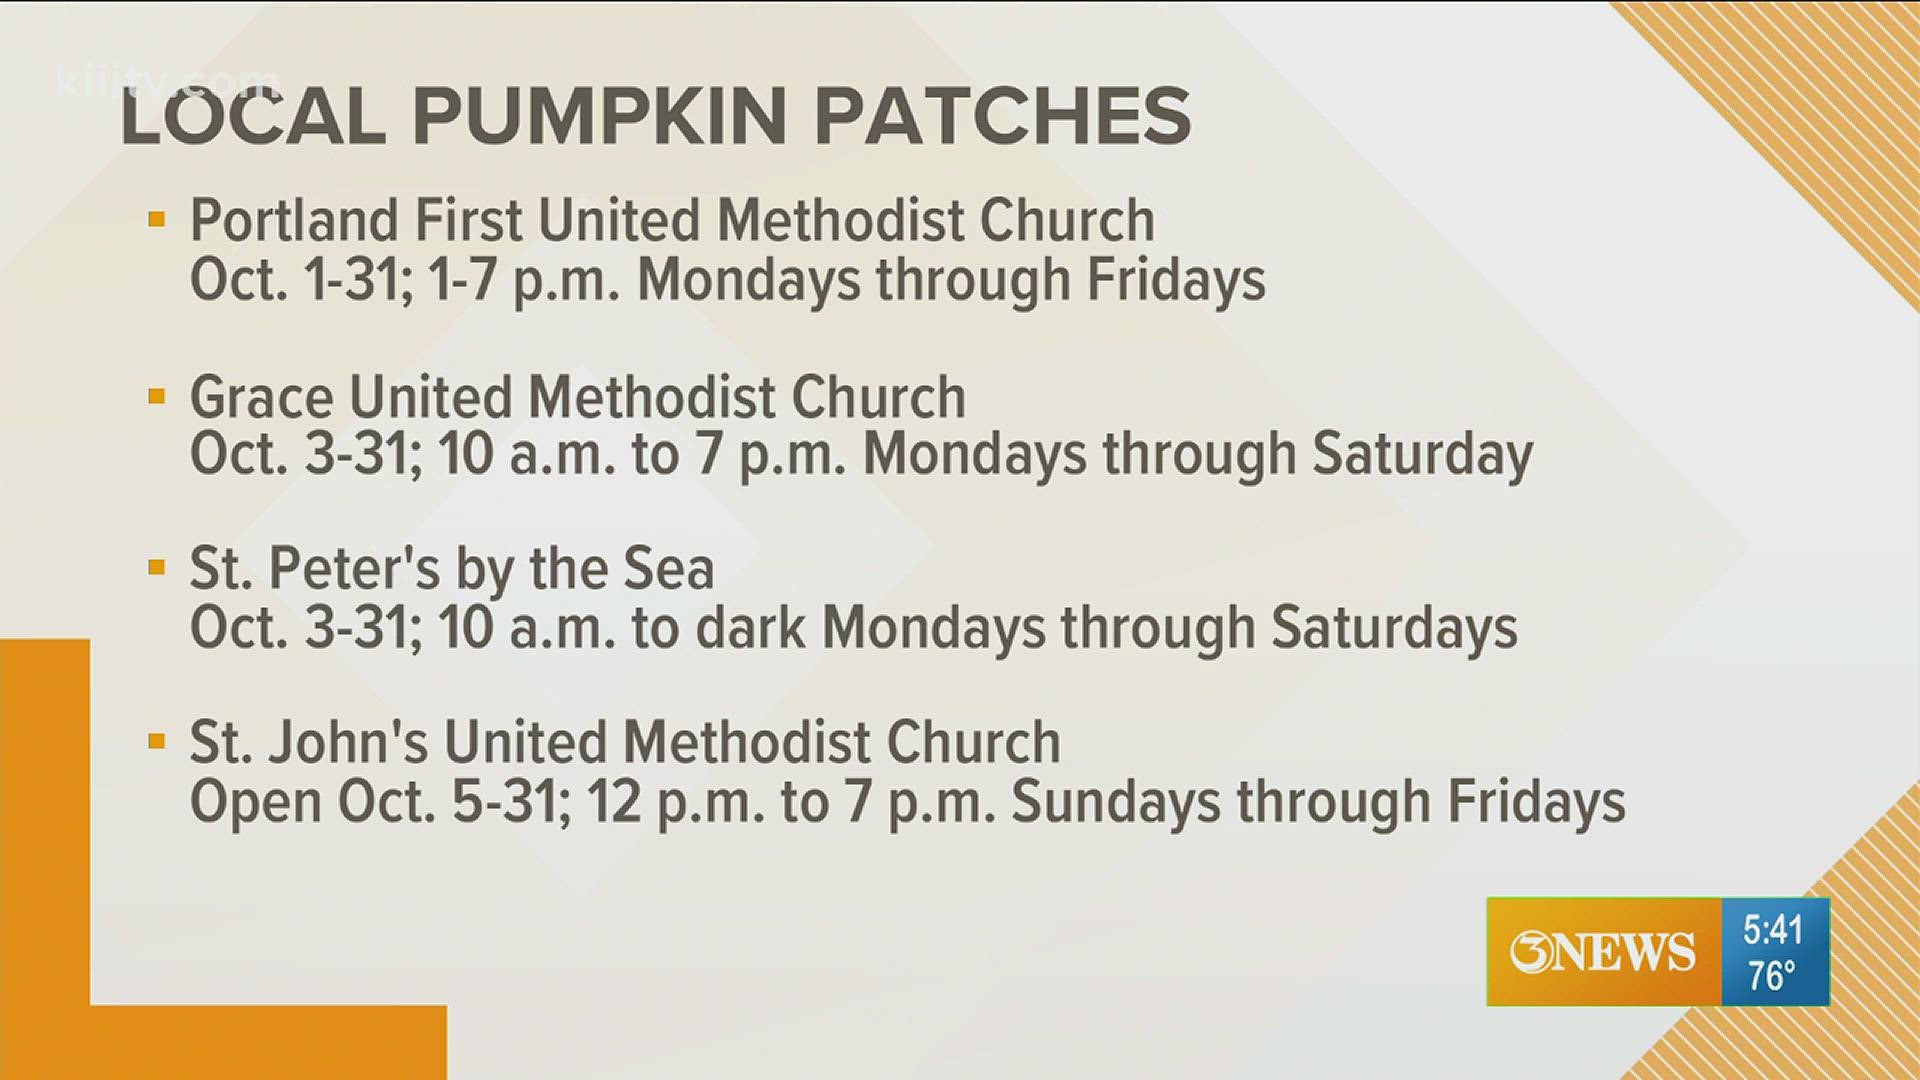 If you're looking for the perfect pumpkin to celebrate Halloween this year, you can find it at a local pumpkin patch.